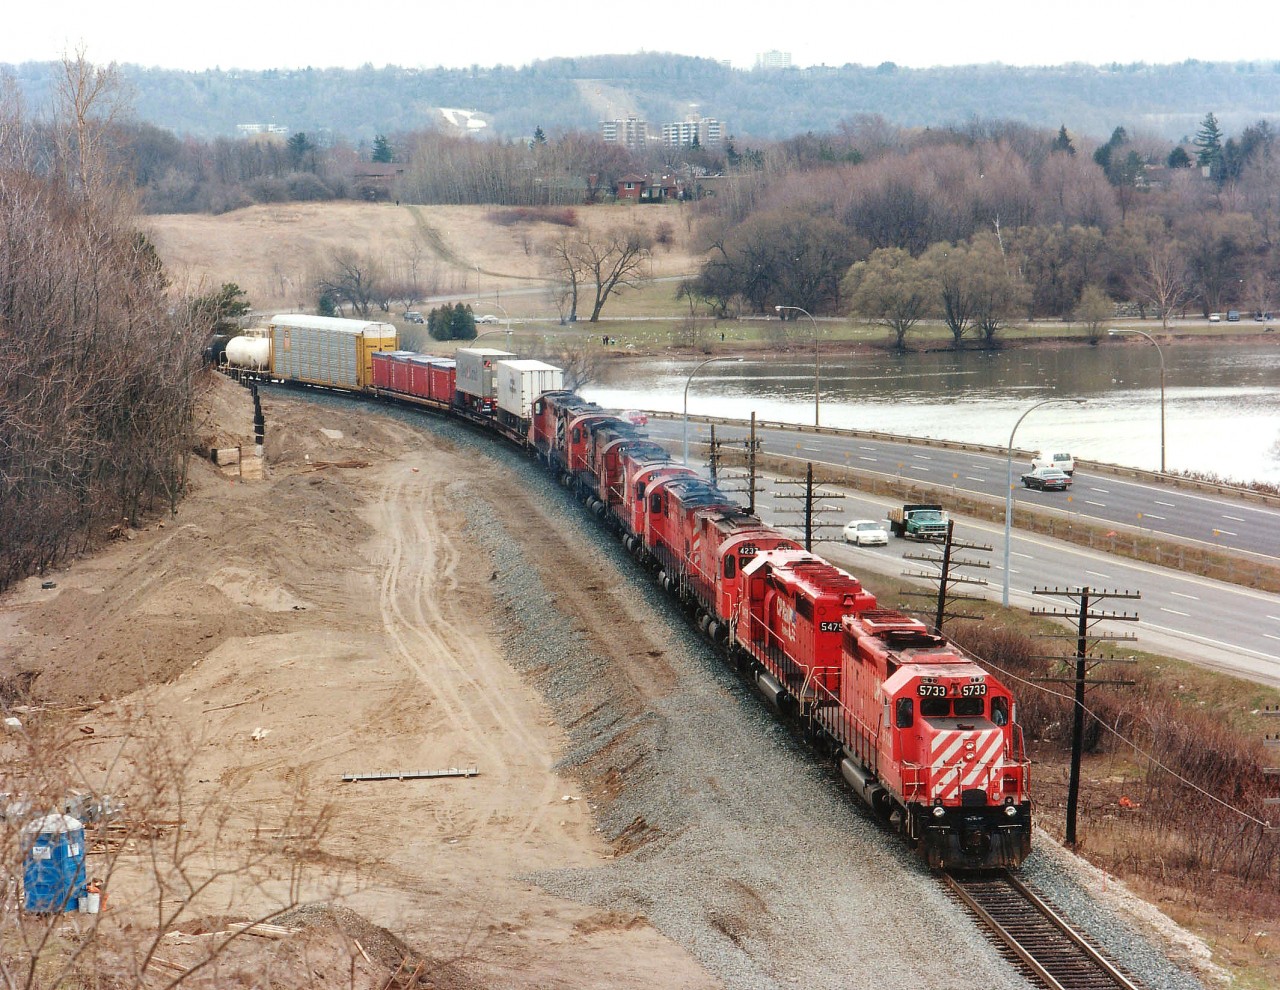 I found myself going into some sort of "railfanner's heat" when this train entered my viewfinder as I stood looking over the High Level bridge at the west end of Hamilton. There had been some interesting lashups as of late but this one was a real treat. CP 5733, 5475, 4237, 4243, 4226, 4718, 4241 and 1621 are seen slowly making their way along. (Hwy 403 is in the background). Certainly a lot of history in these units: 5733 ret'd 2008; 5475 (converted to a "B") went to NRE 2004; 4237 to Delson RR Museum; 4243 to NBEC; 4226 converted to control cab 1104; 4718 "re-retired 1995; 4241 to Que Gatineau; and 1621 was retired in 2011. Note construction for extra track to accommodate GO Transit service for Hamilton is just underway.